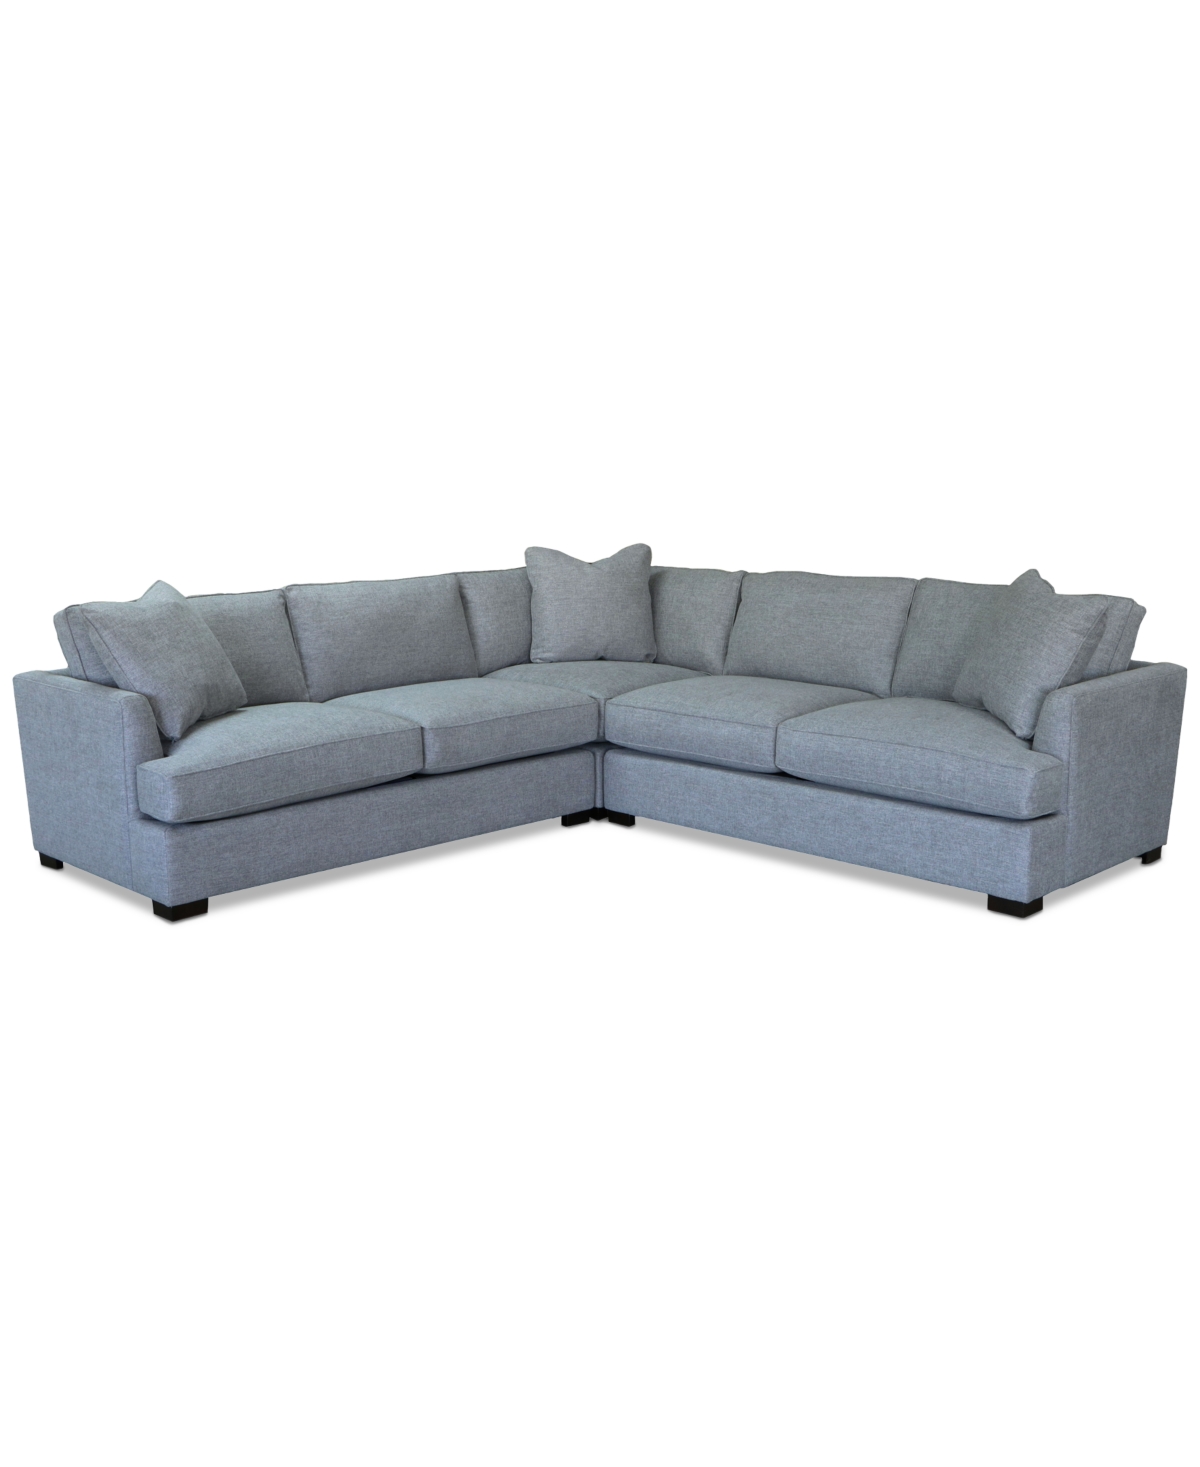 Furniture Nightford 111" 3-pc. Fabric L Sectional, Created For Macy's In Granite